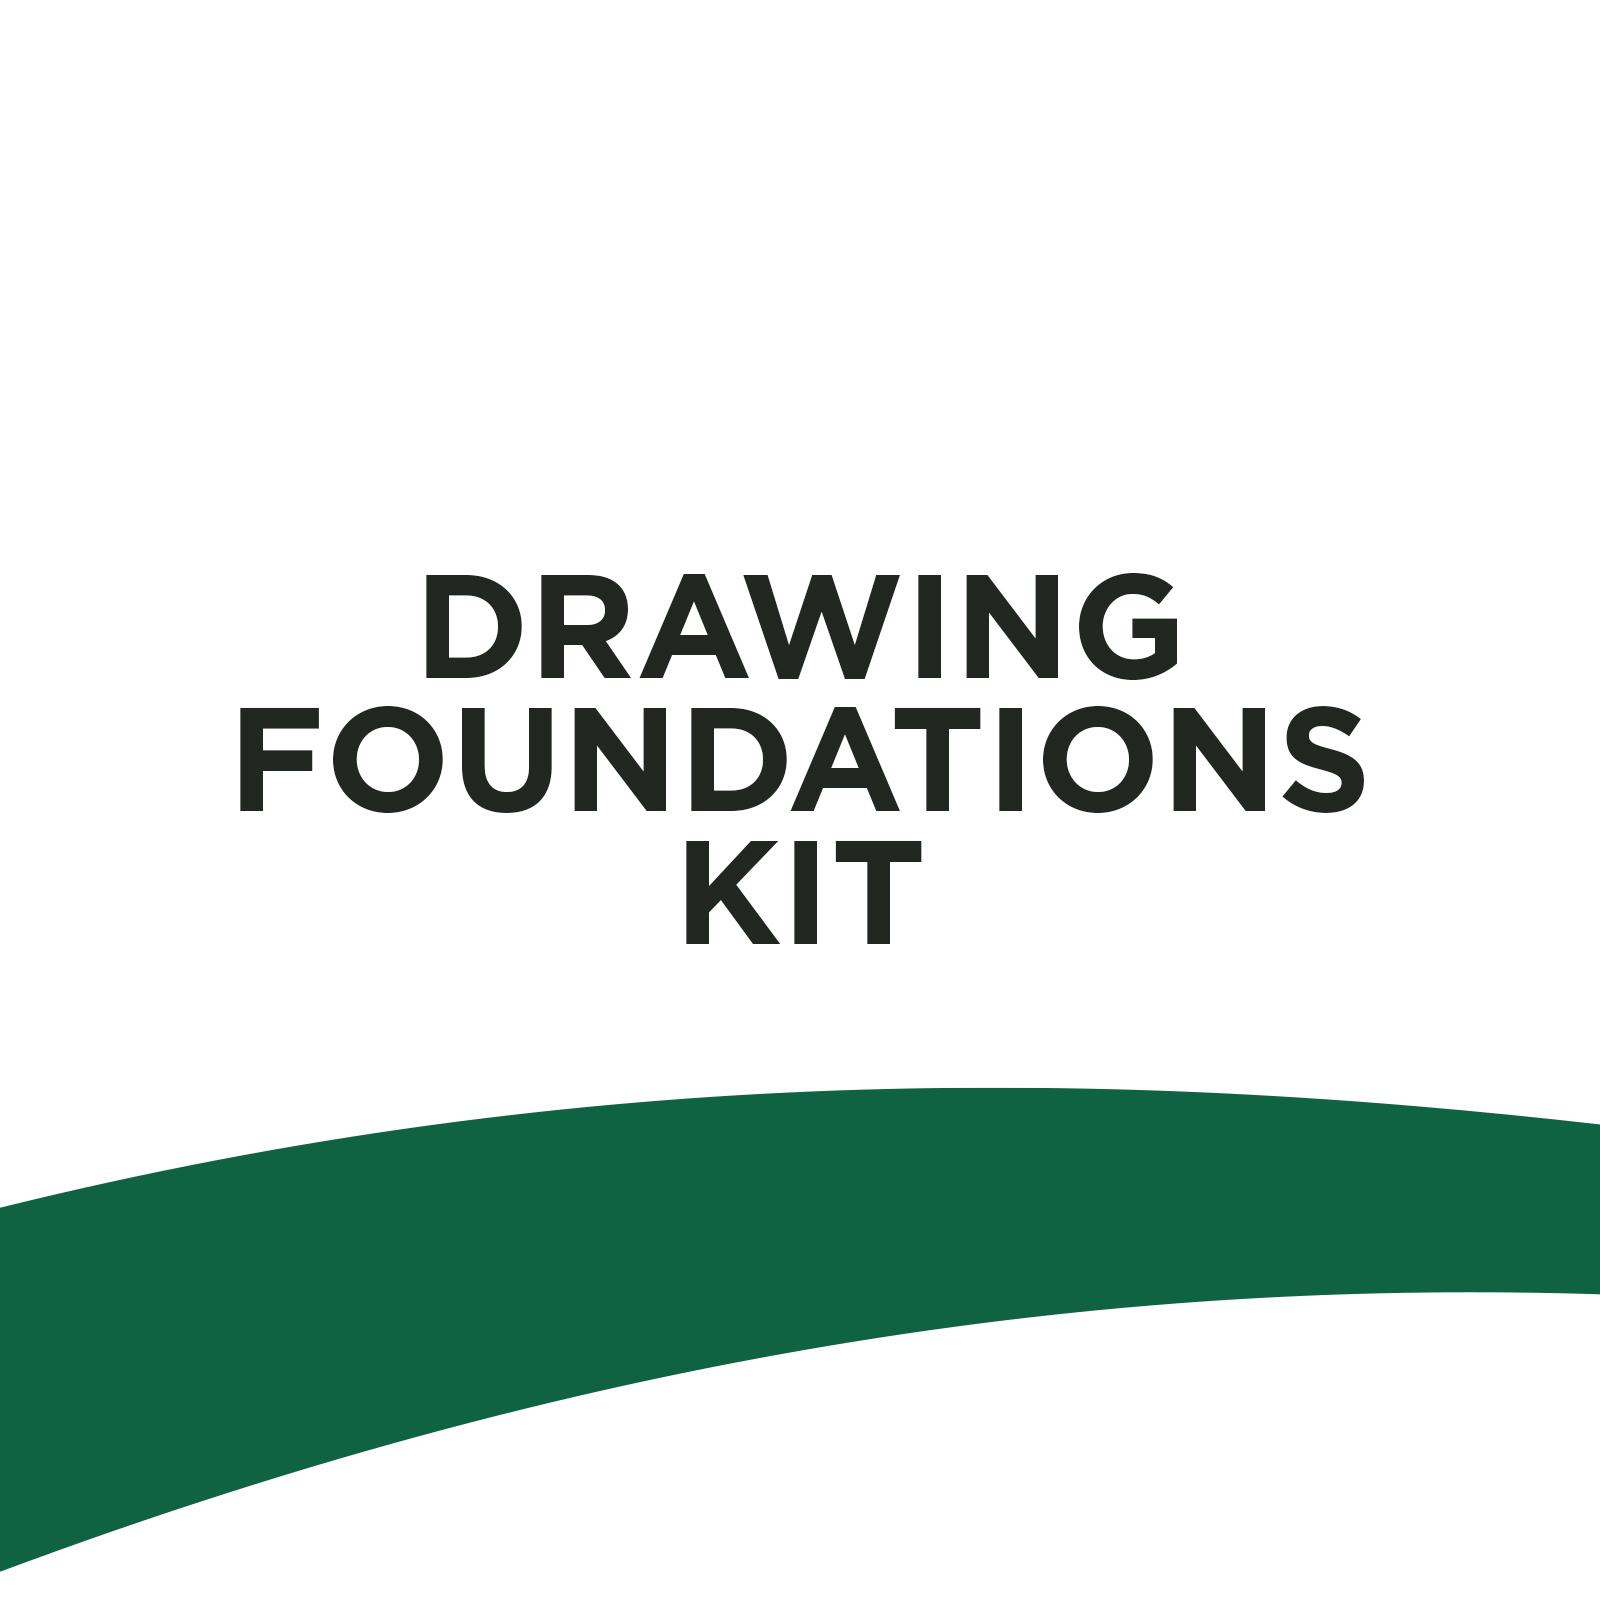 KIT - DRAWING FOUNDATIONS